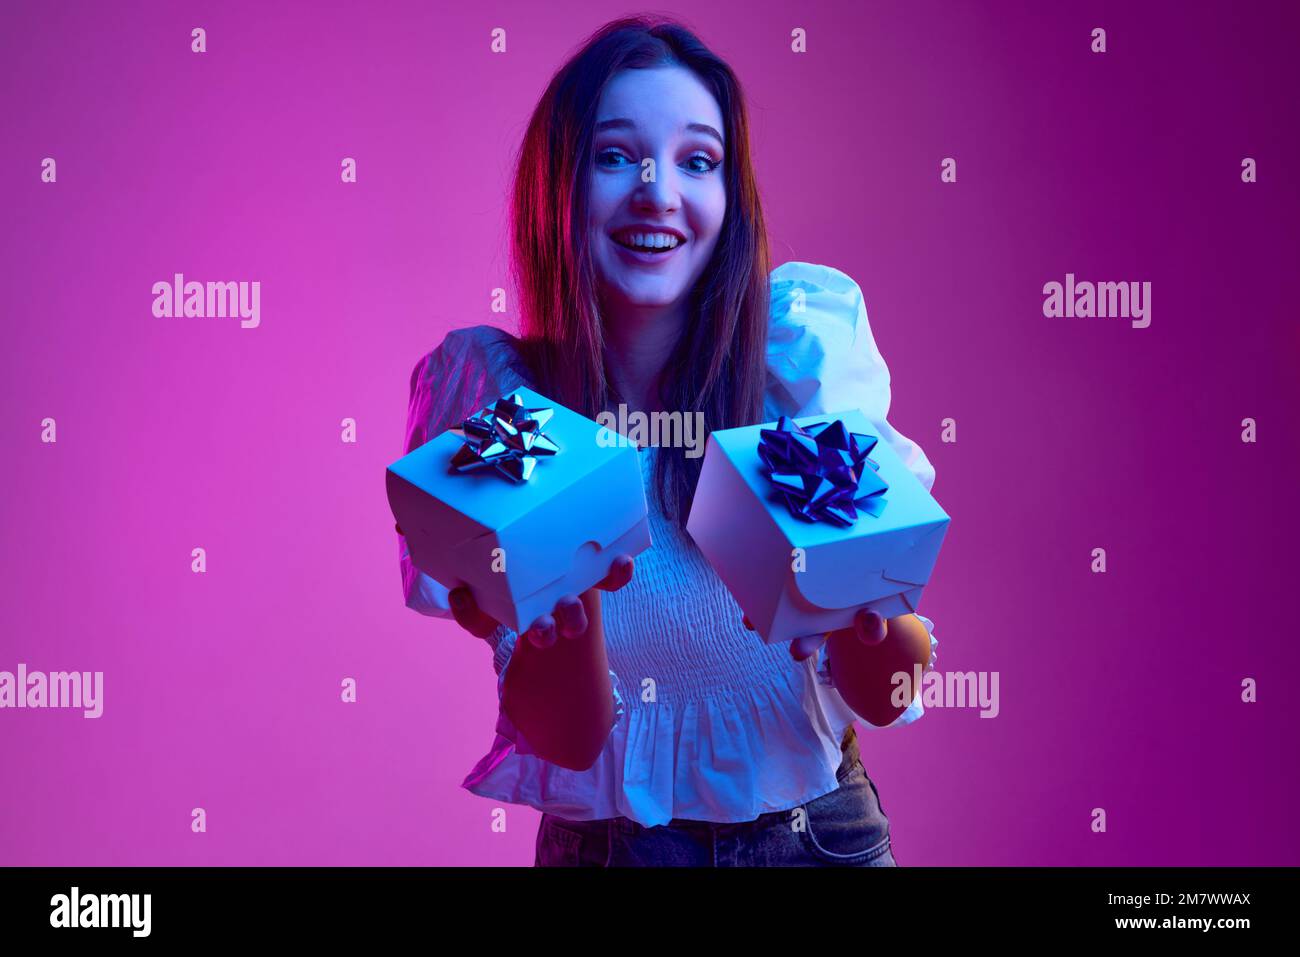 Portrait of young emotive girl holding two presents with happiness over pink background in neon light. Concept of emotions, youth, lifestyle Stock Photo